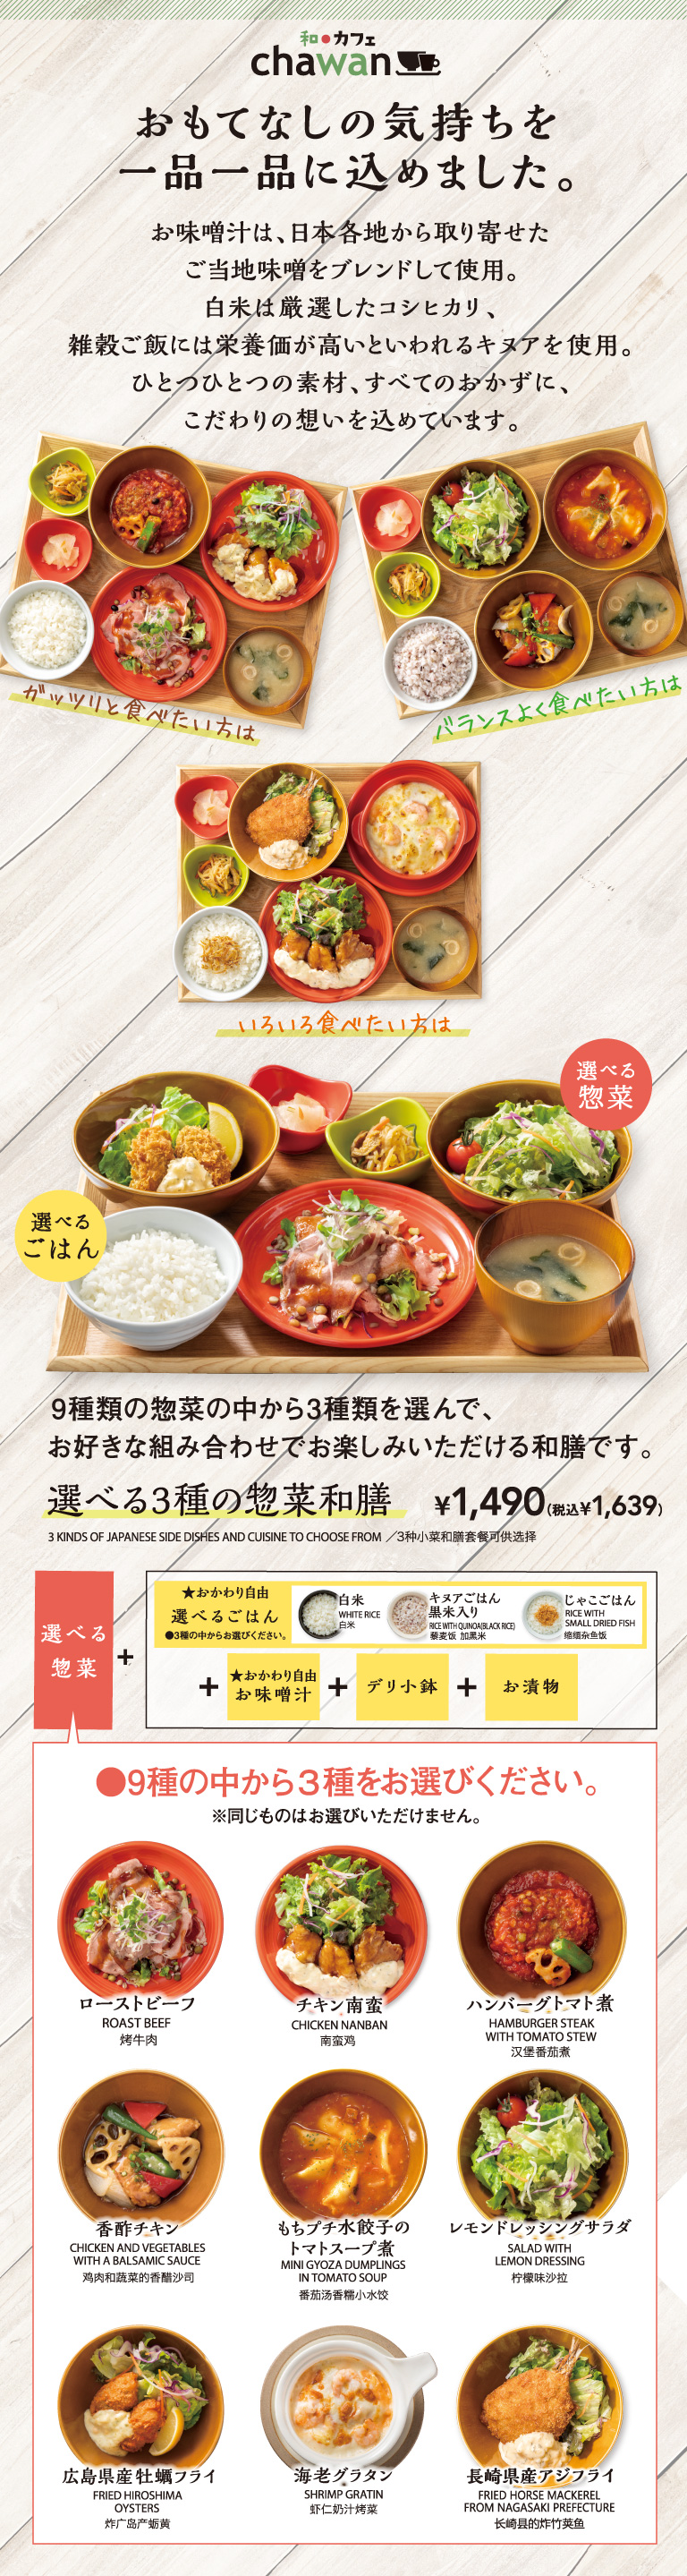 3 Kinds of Japanese Side Dishes and Cuisine to Choose From, Shiro gohan /rice with quinoa, black rice/ Rice with small dried fish, miso soup, small small dish, pickles